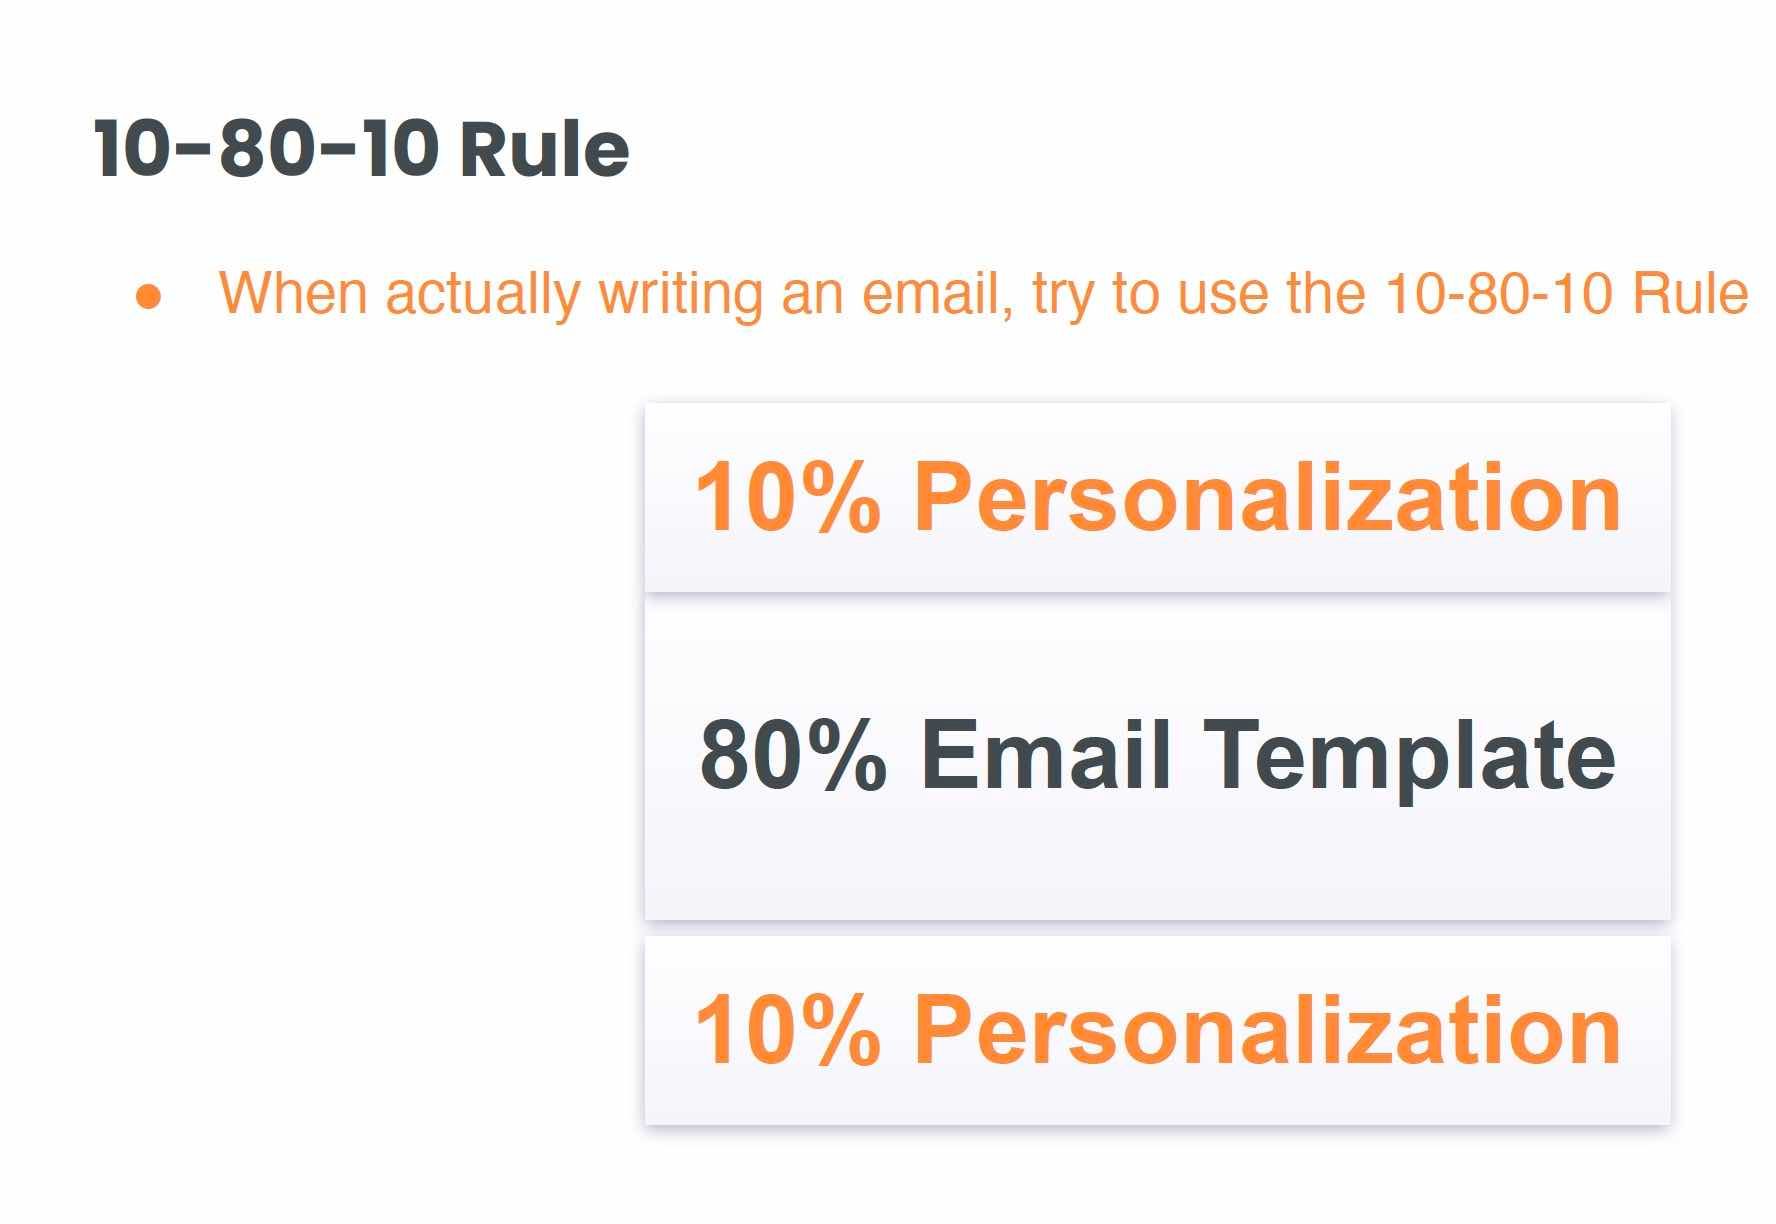 the 10-80-10 email rule